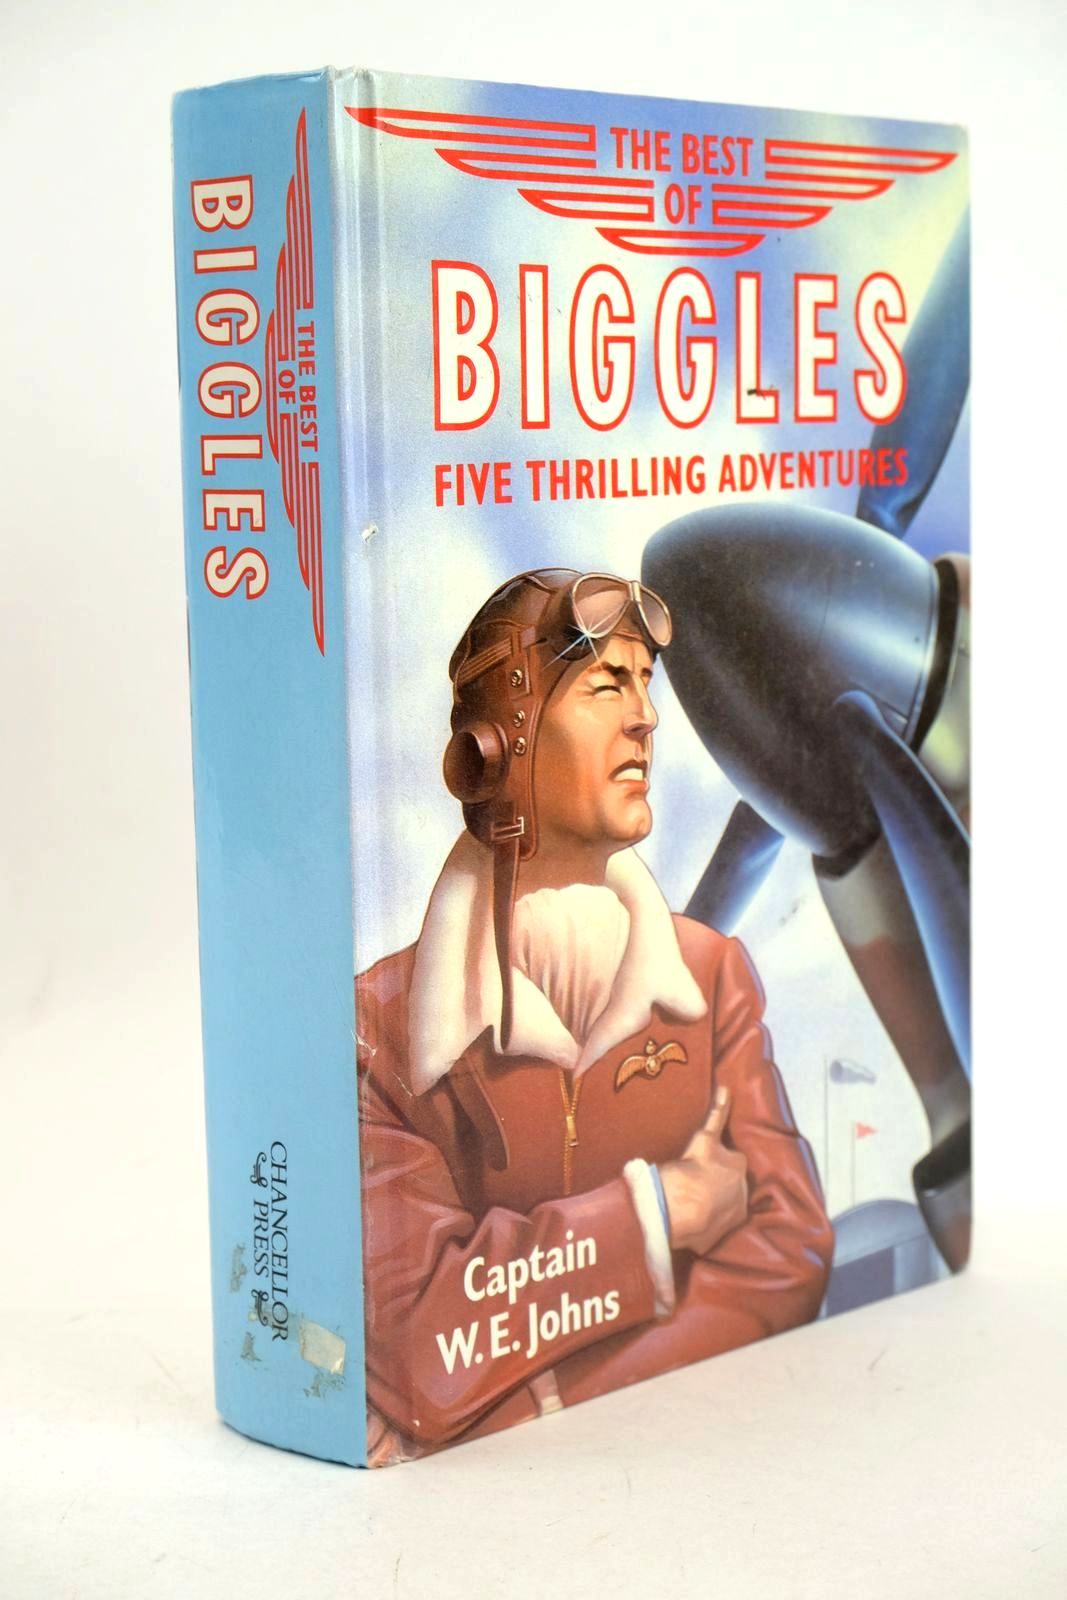 Photo of THE BEST OF BIGGLES written by Johns, W.E. published by Chancellor Press (STOCK CODE: 1326689)  for sale by Stella & Rose's Books